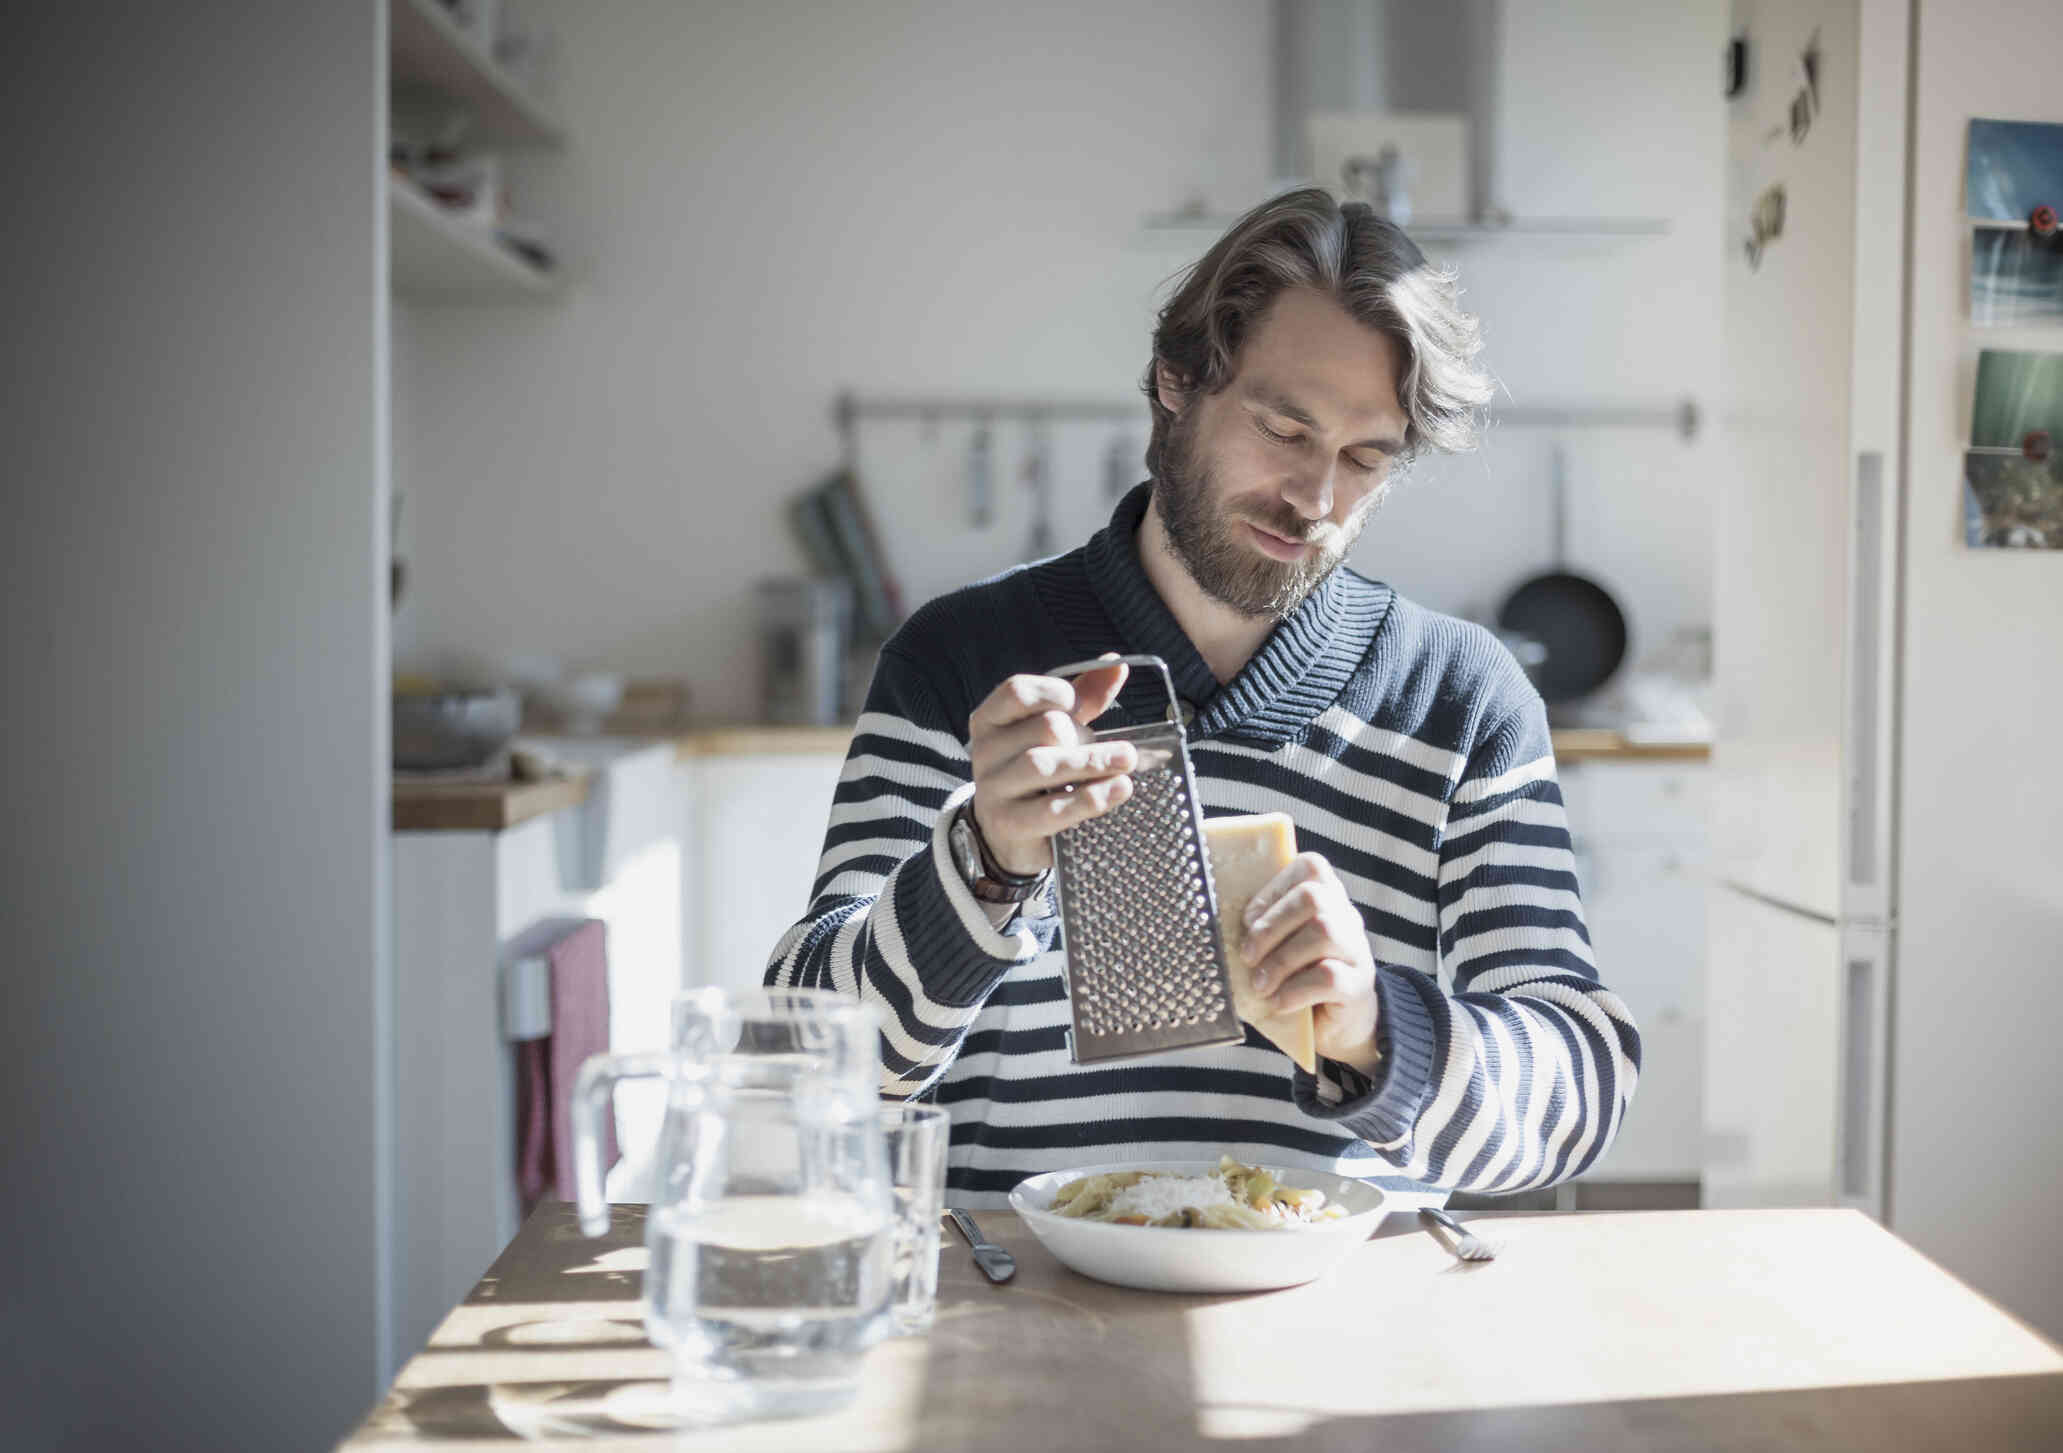 A man in a striped shirt sits at his kitchen table and grates cheese onto his food.